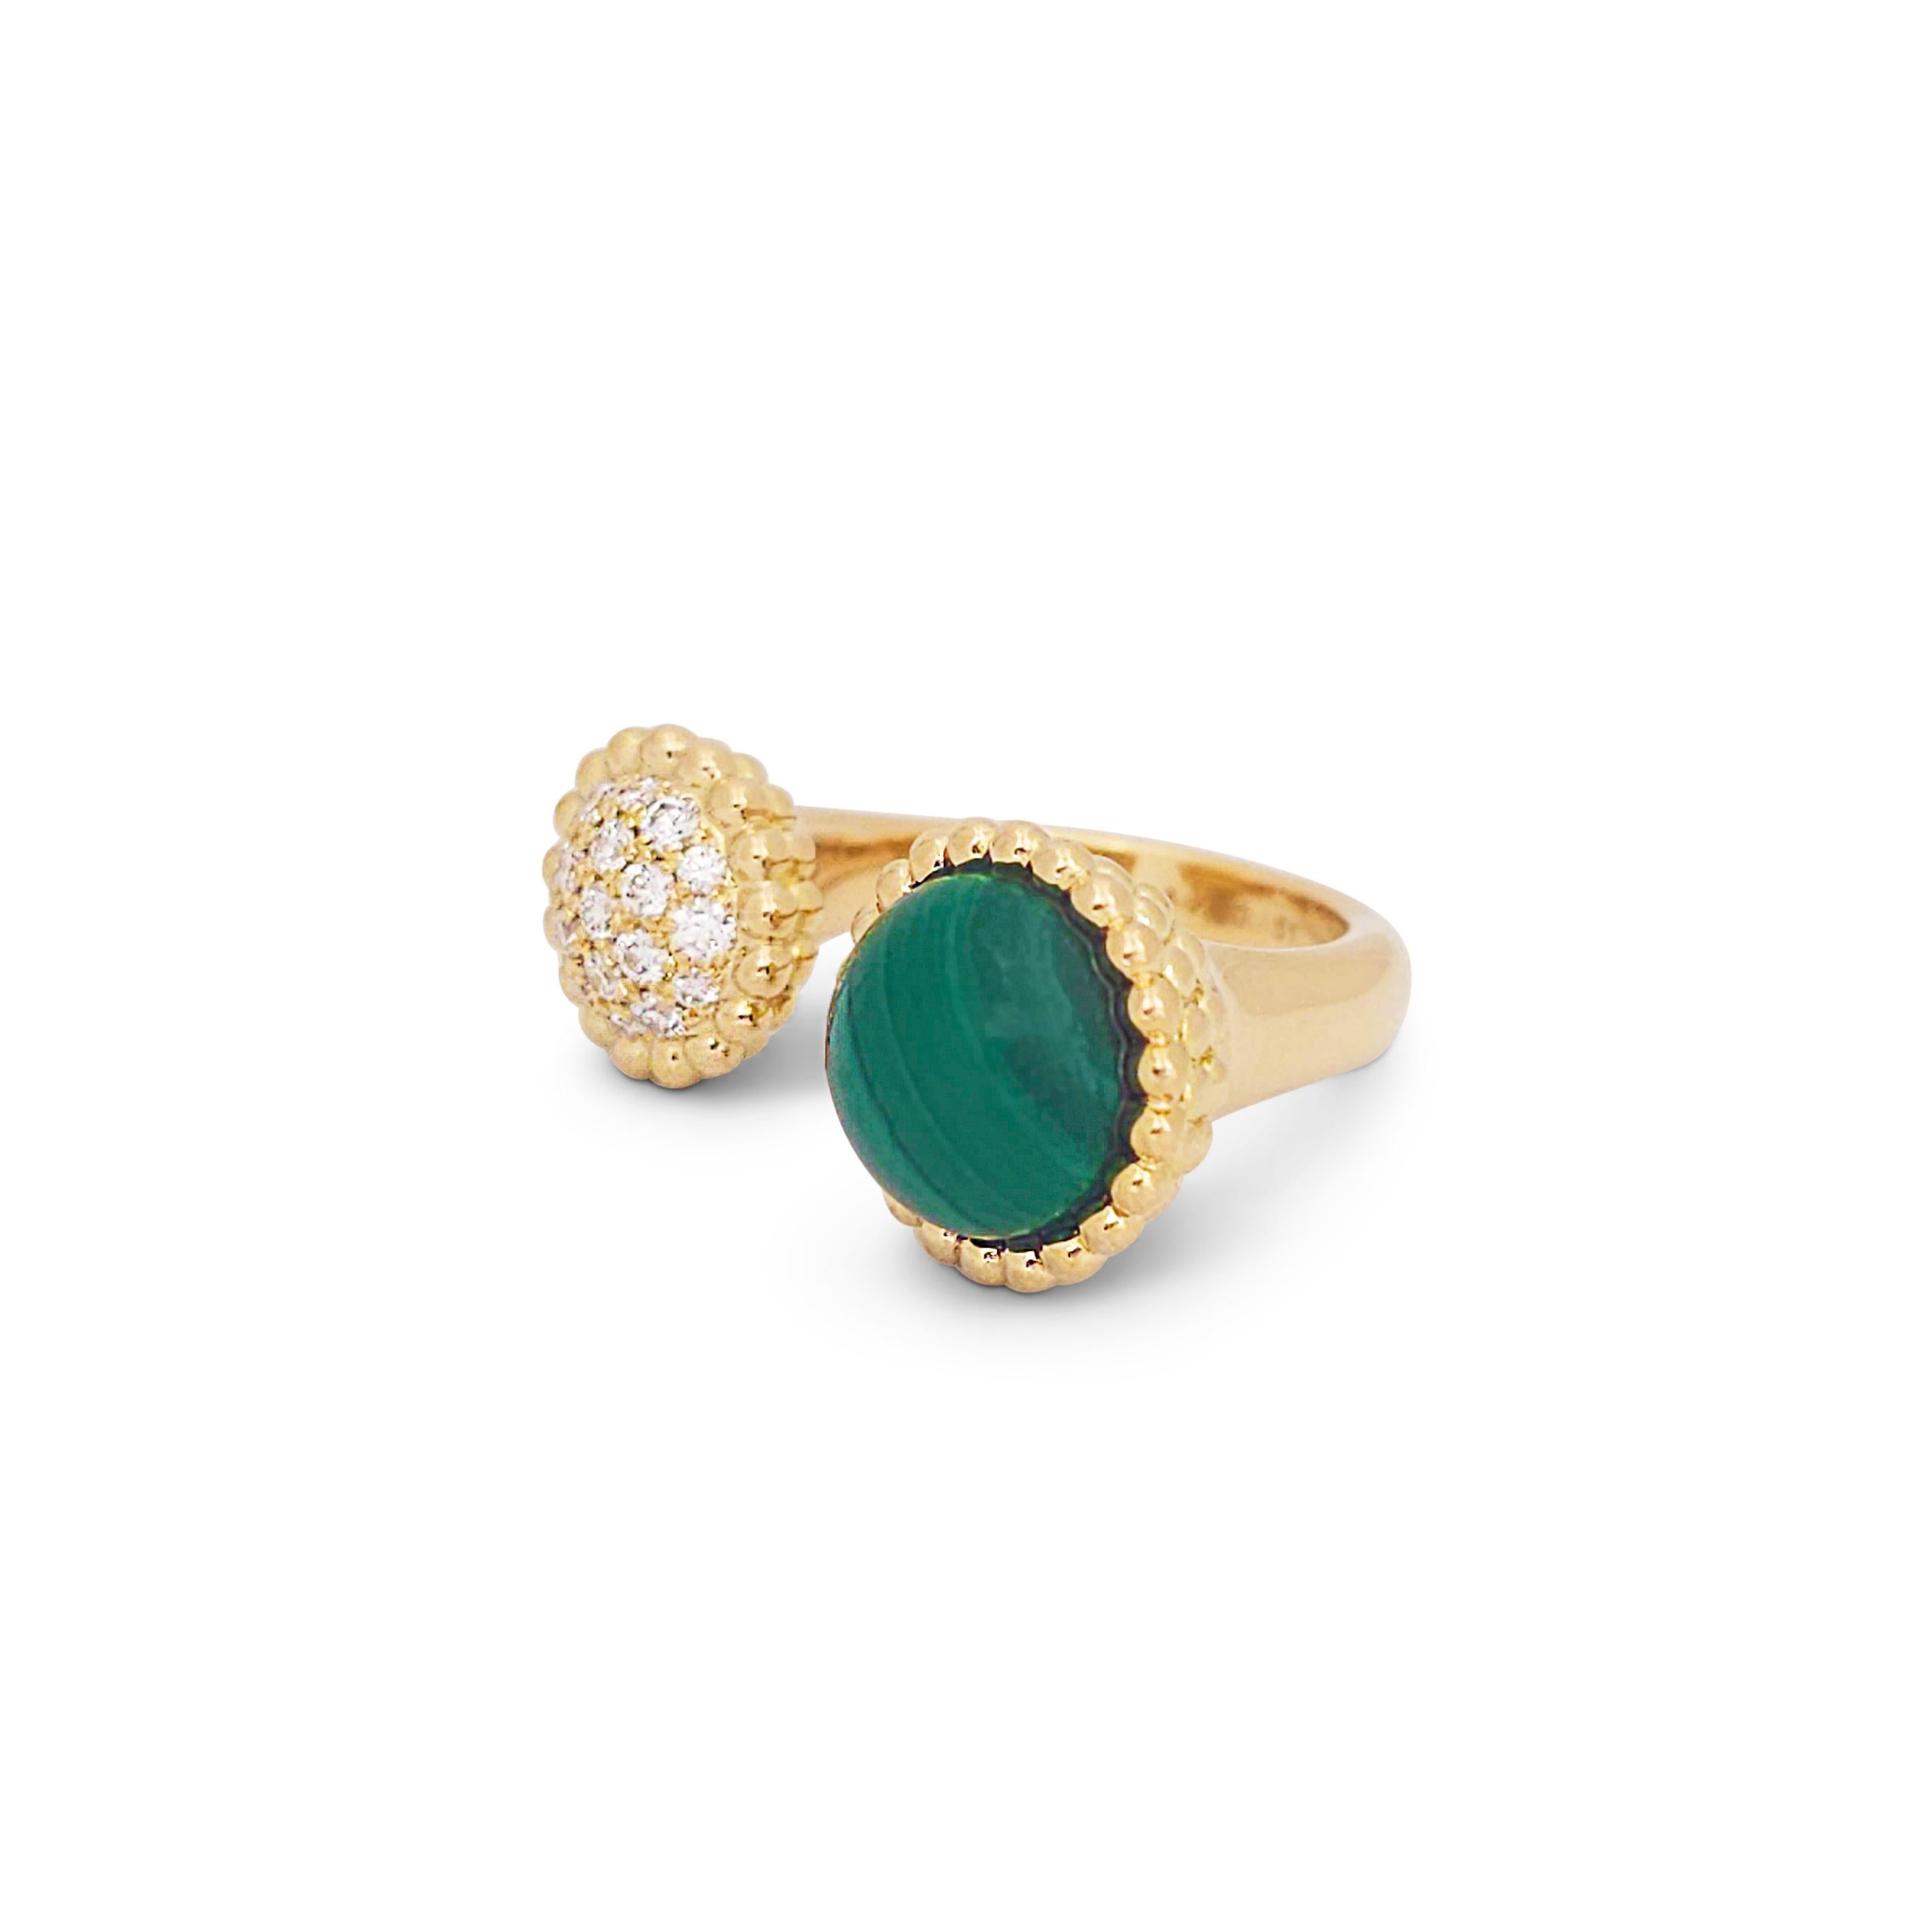 Authentic Van Cleef & Arpels Perlée Couleurs between the finger ring crafted in 18 karat yellow gold.  The split ring is set on one end with a polished cabachon malachite, the other end is set with approximately 0.35 carats of sparkling round cut